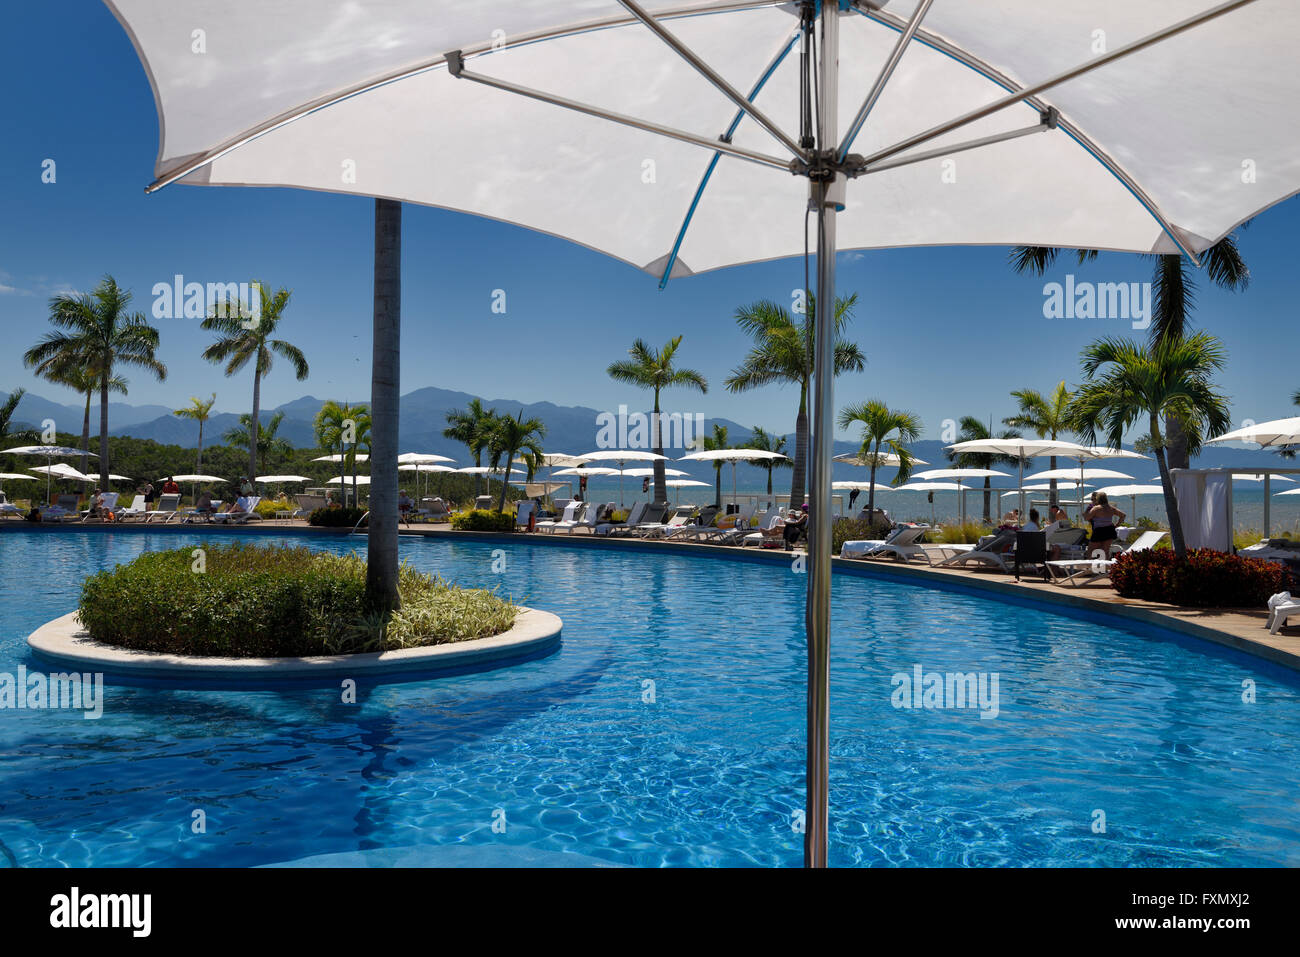 Under an umbrella poolside on the Pacific ocean with Sierra Madre mountains Mexico Stock Photo